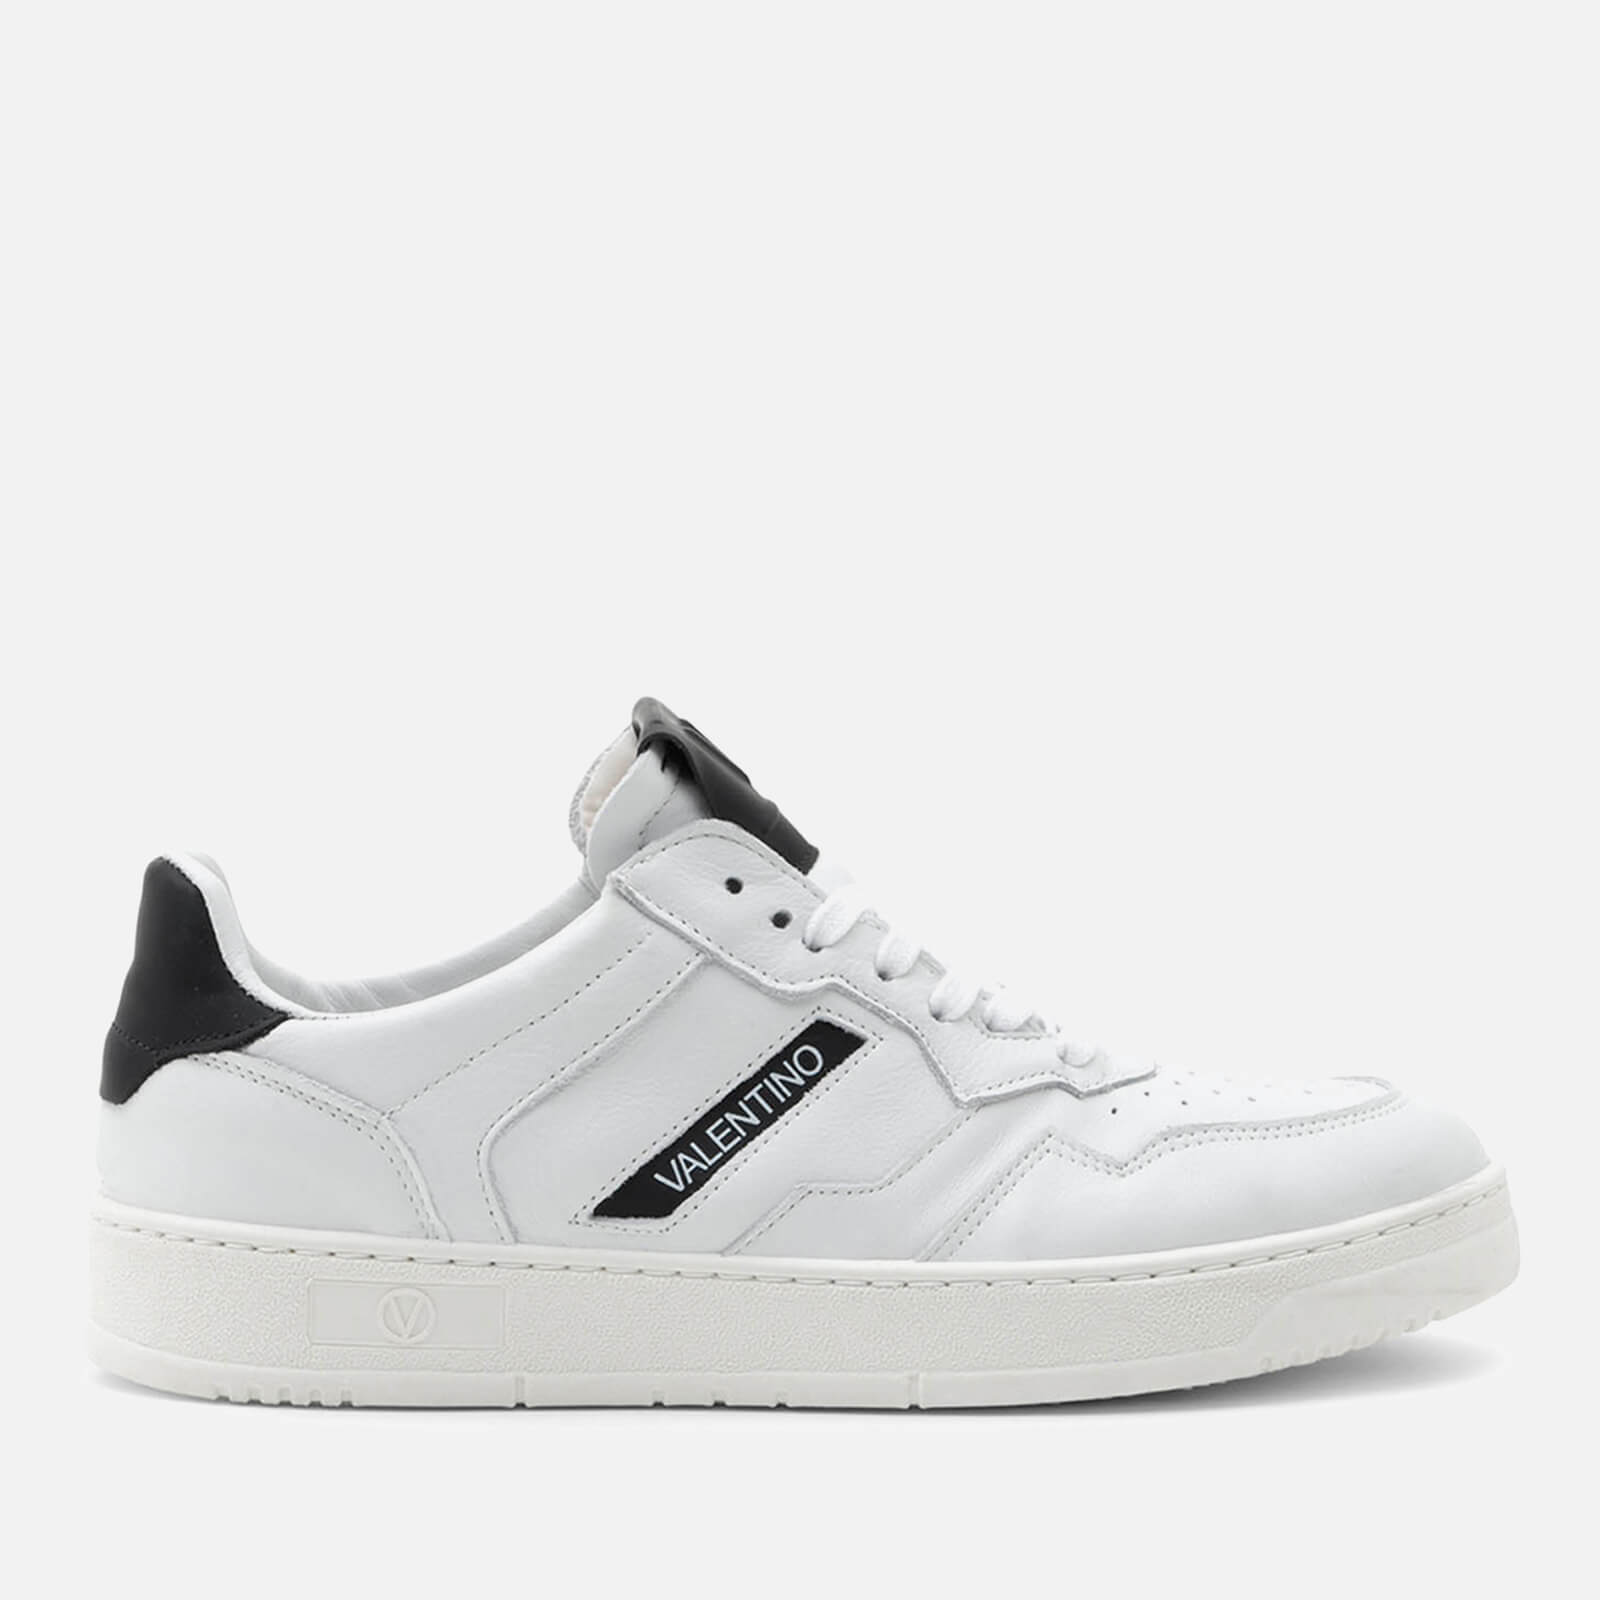 Valentino Men’s Apollo Basket Leather and Suede Trainers